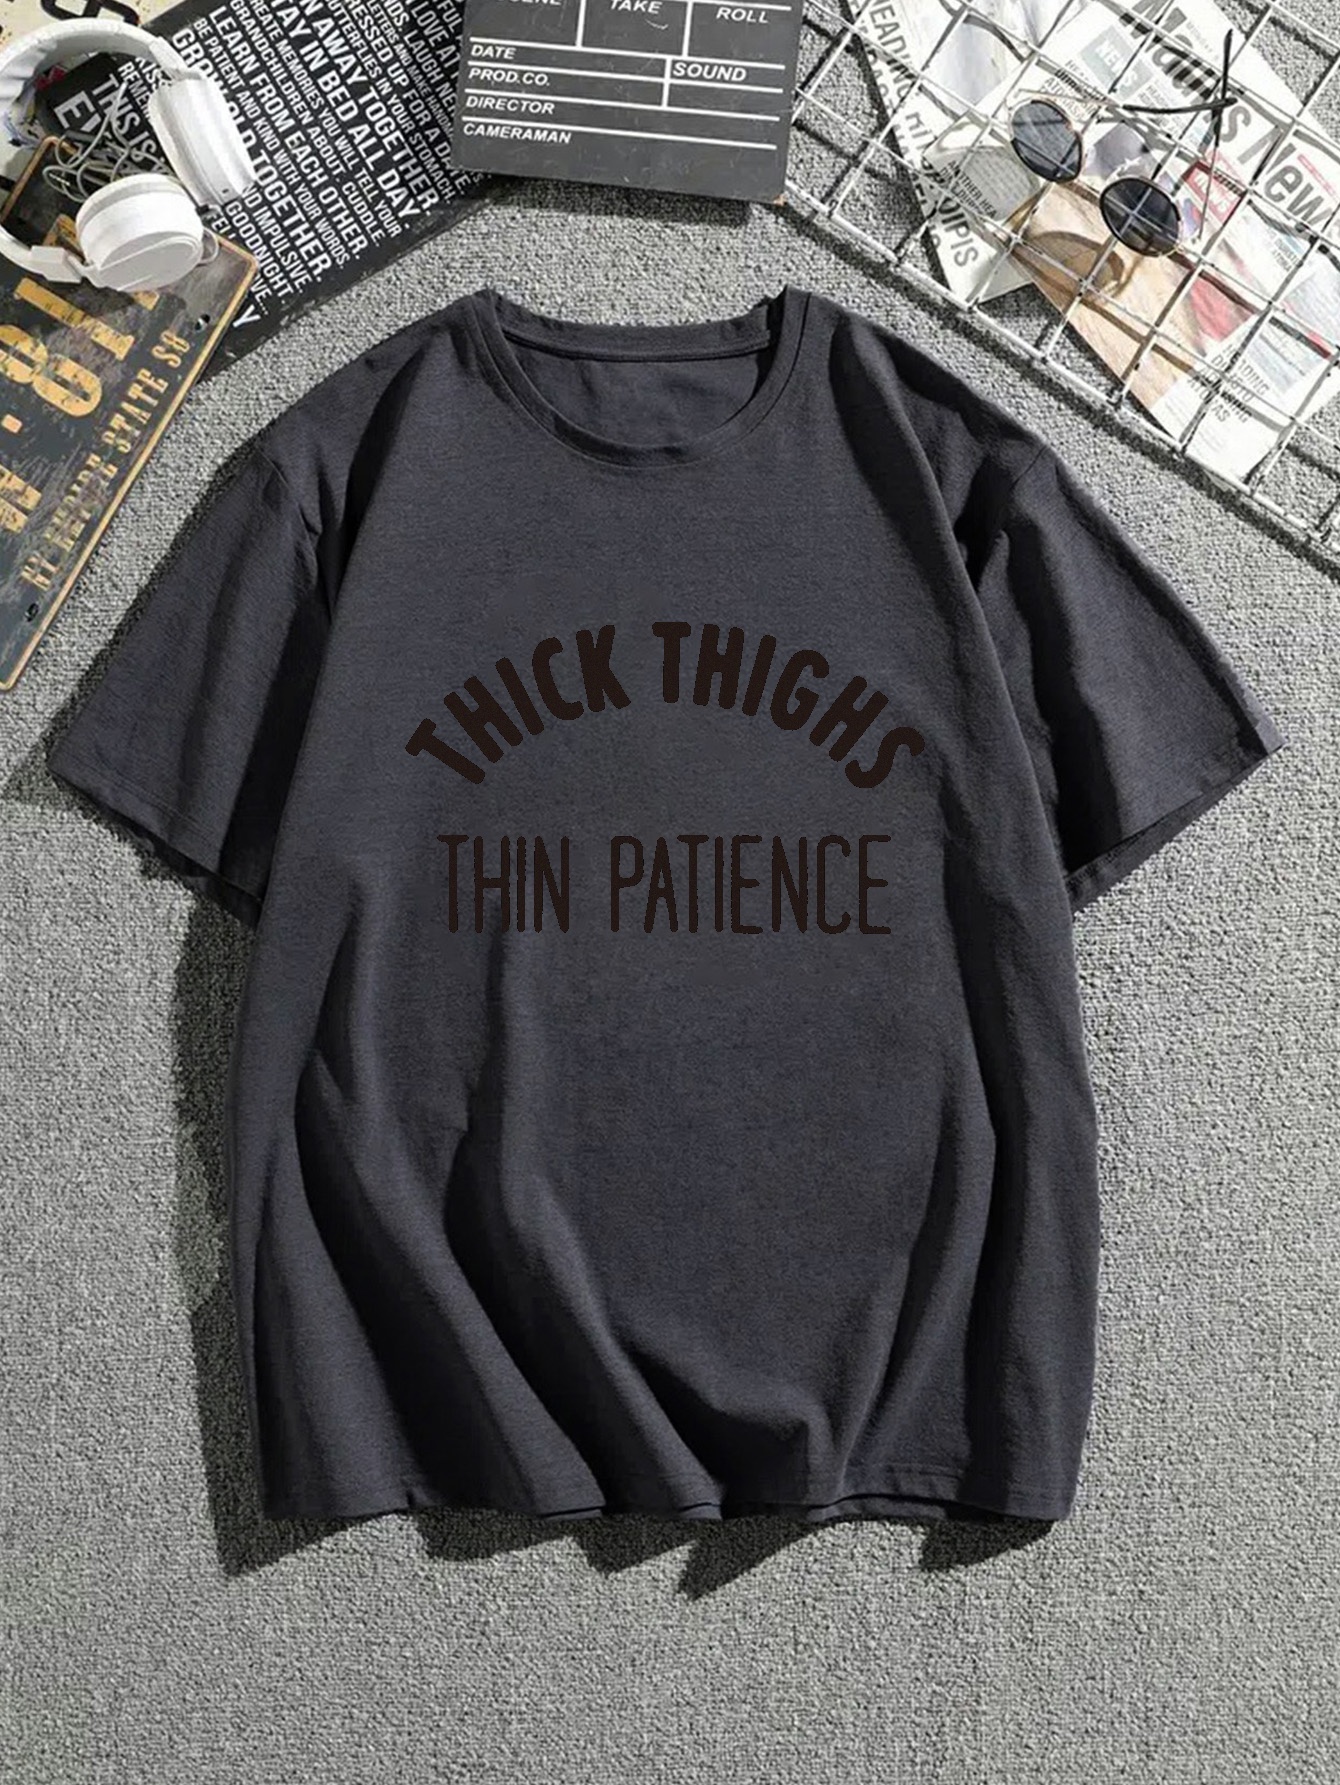 Thick Thighs Thin Patience - Ultra Cotton Short Sleeve T-Shirt- FHD97 –  EveryLine Designs